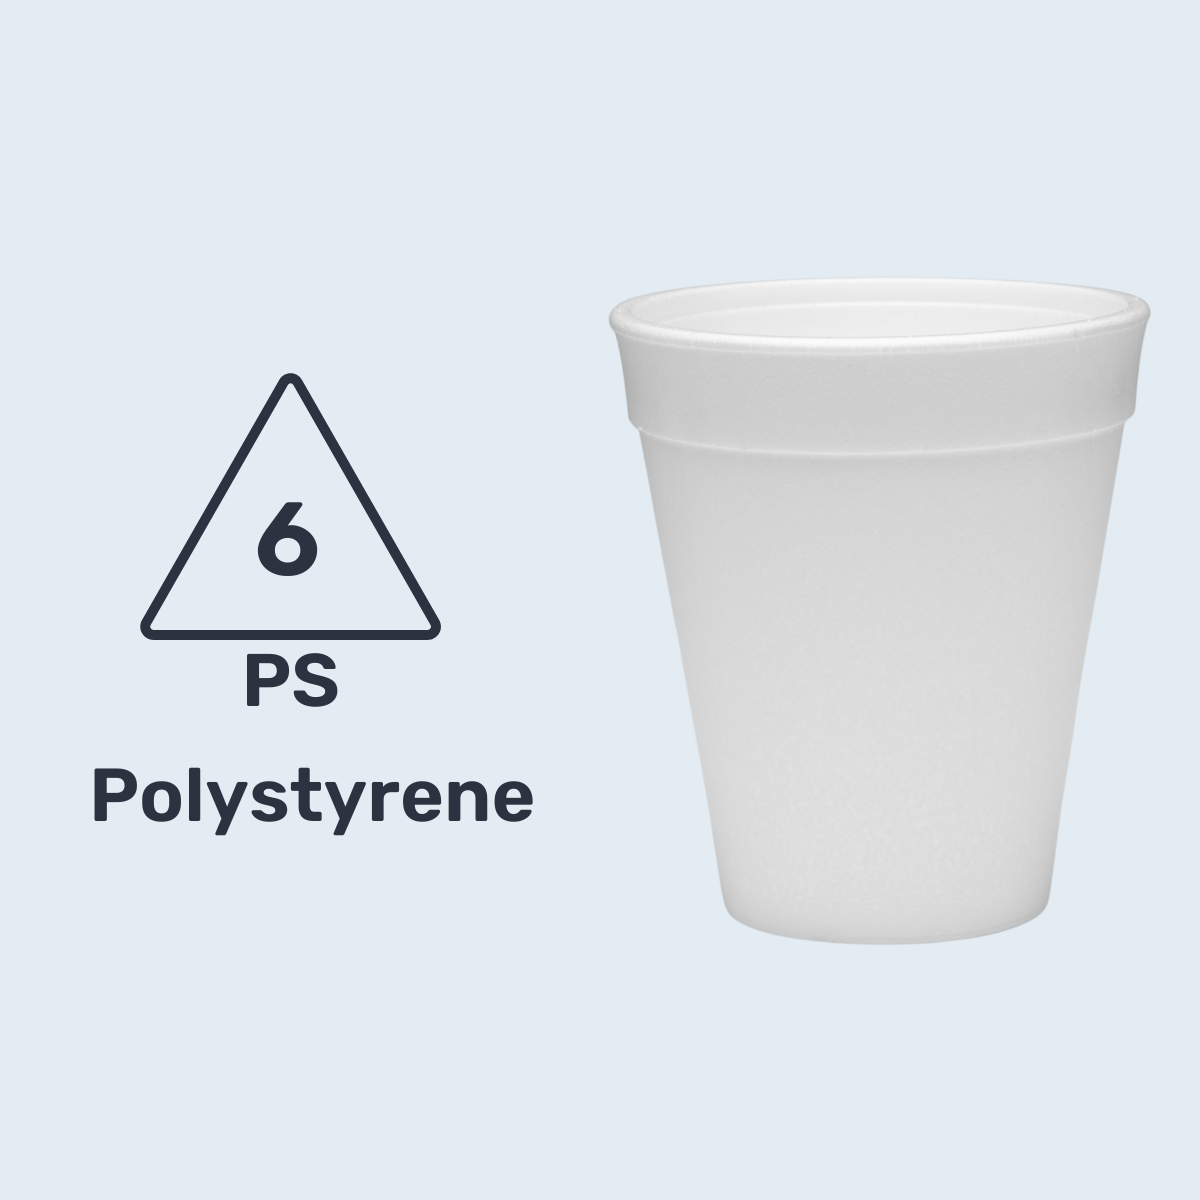 #6 PS - Packaging Polymer Series